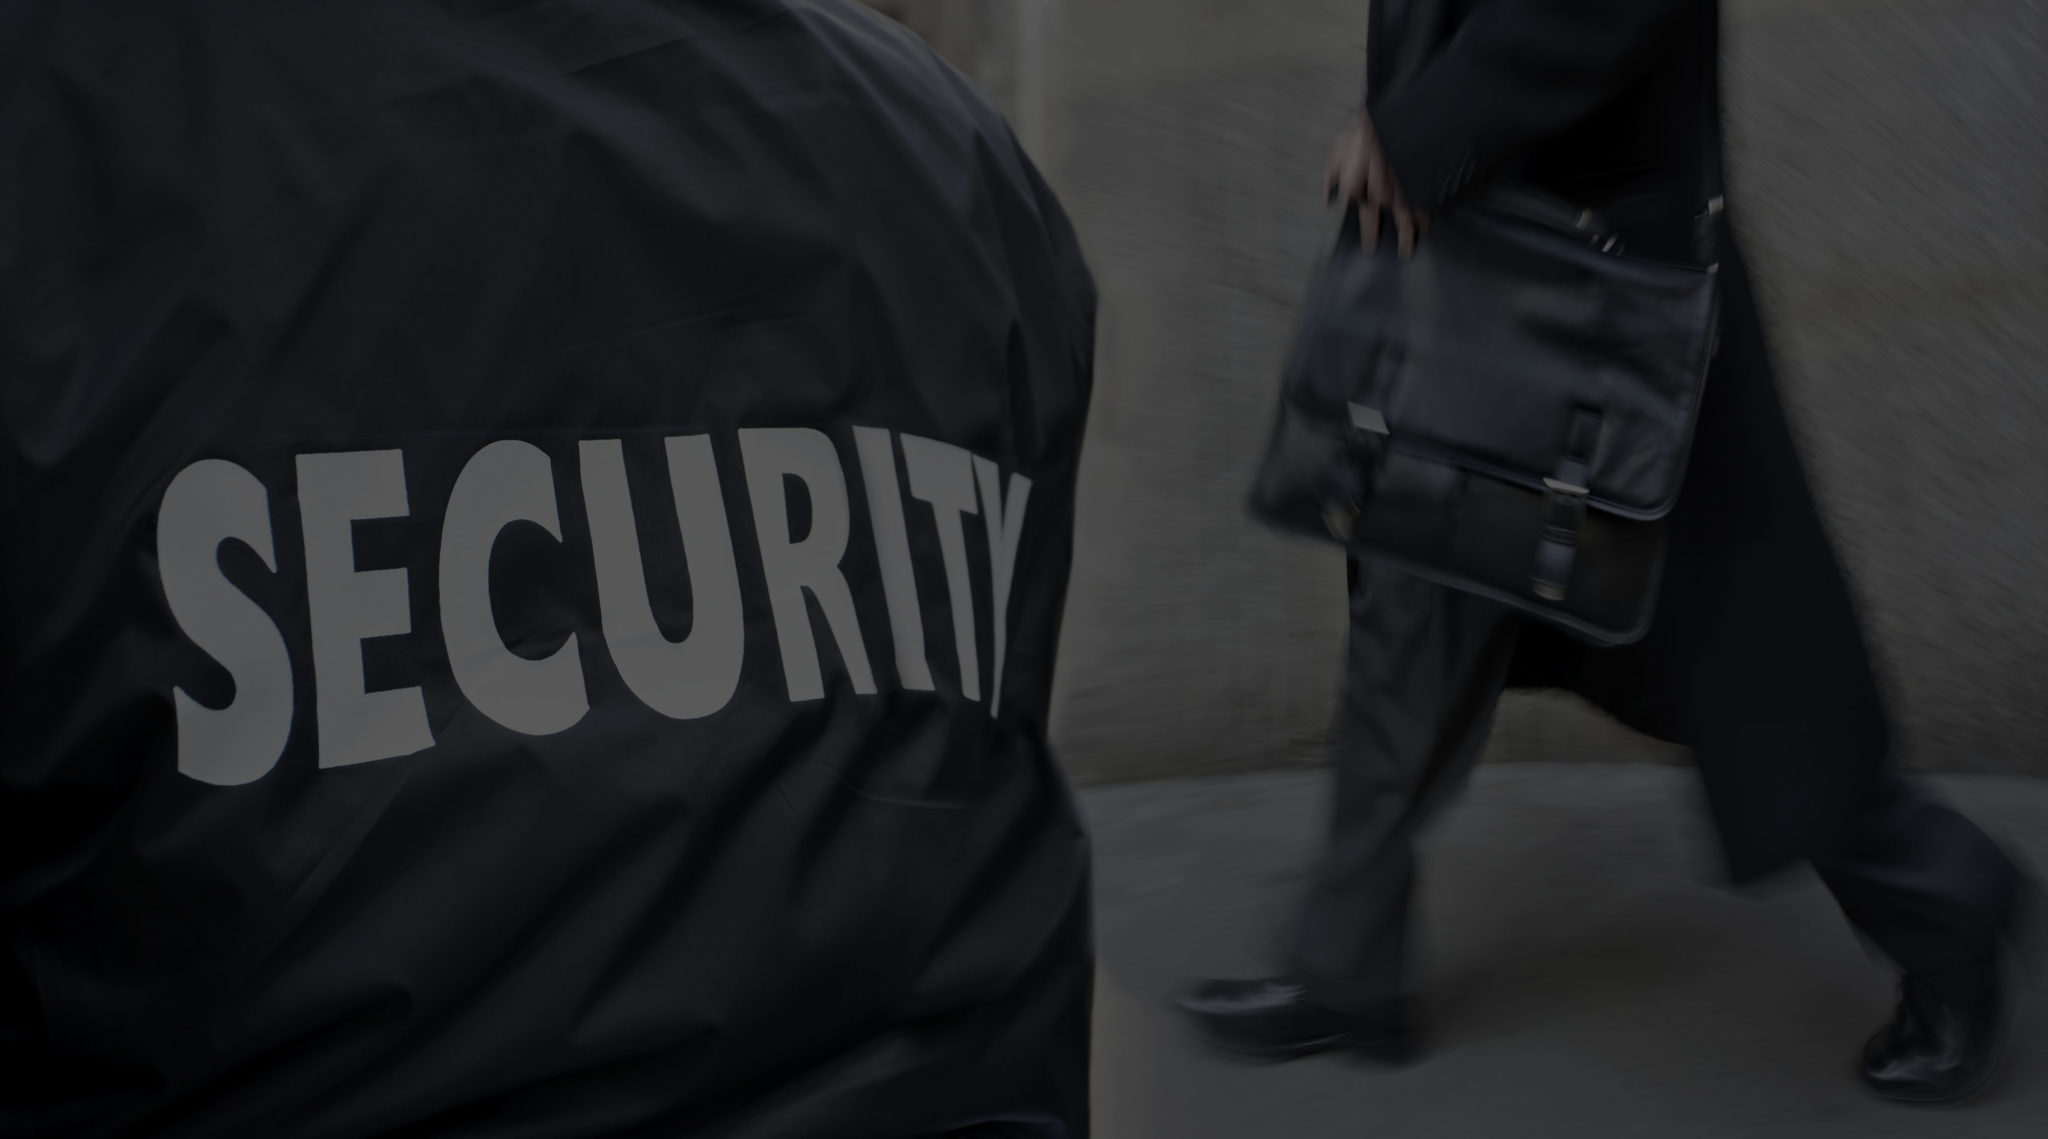 Best Front Desk Security Services in Illinois